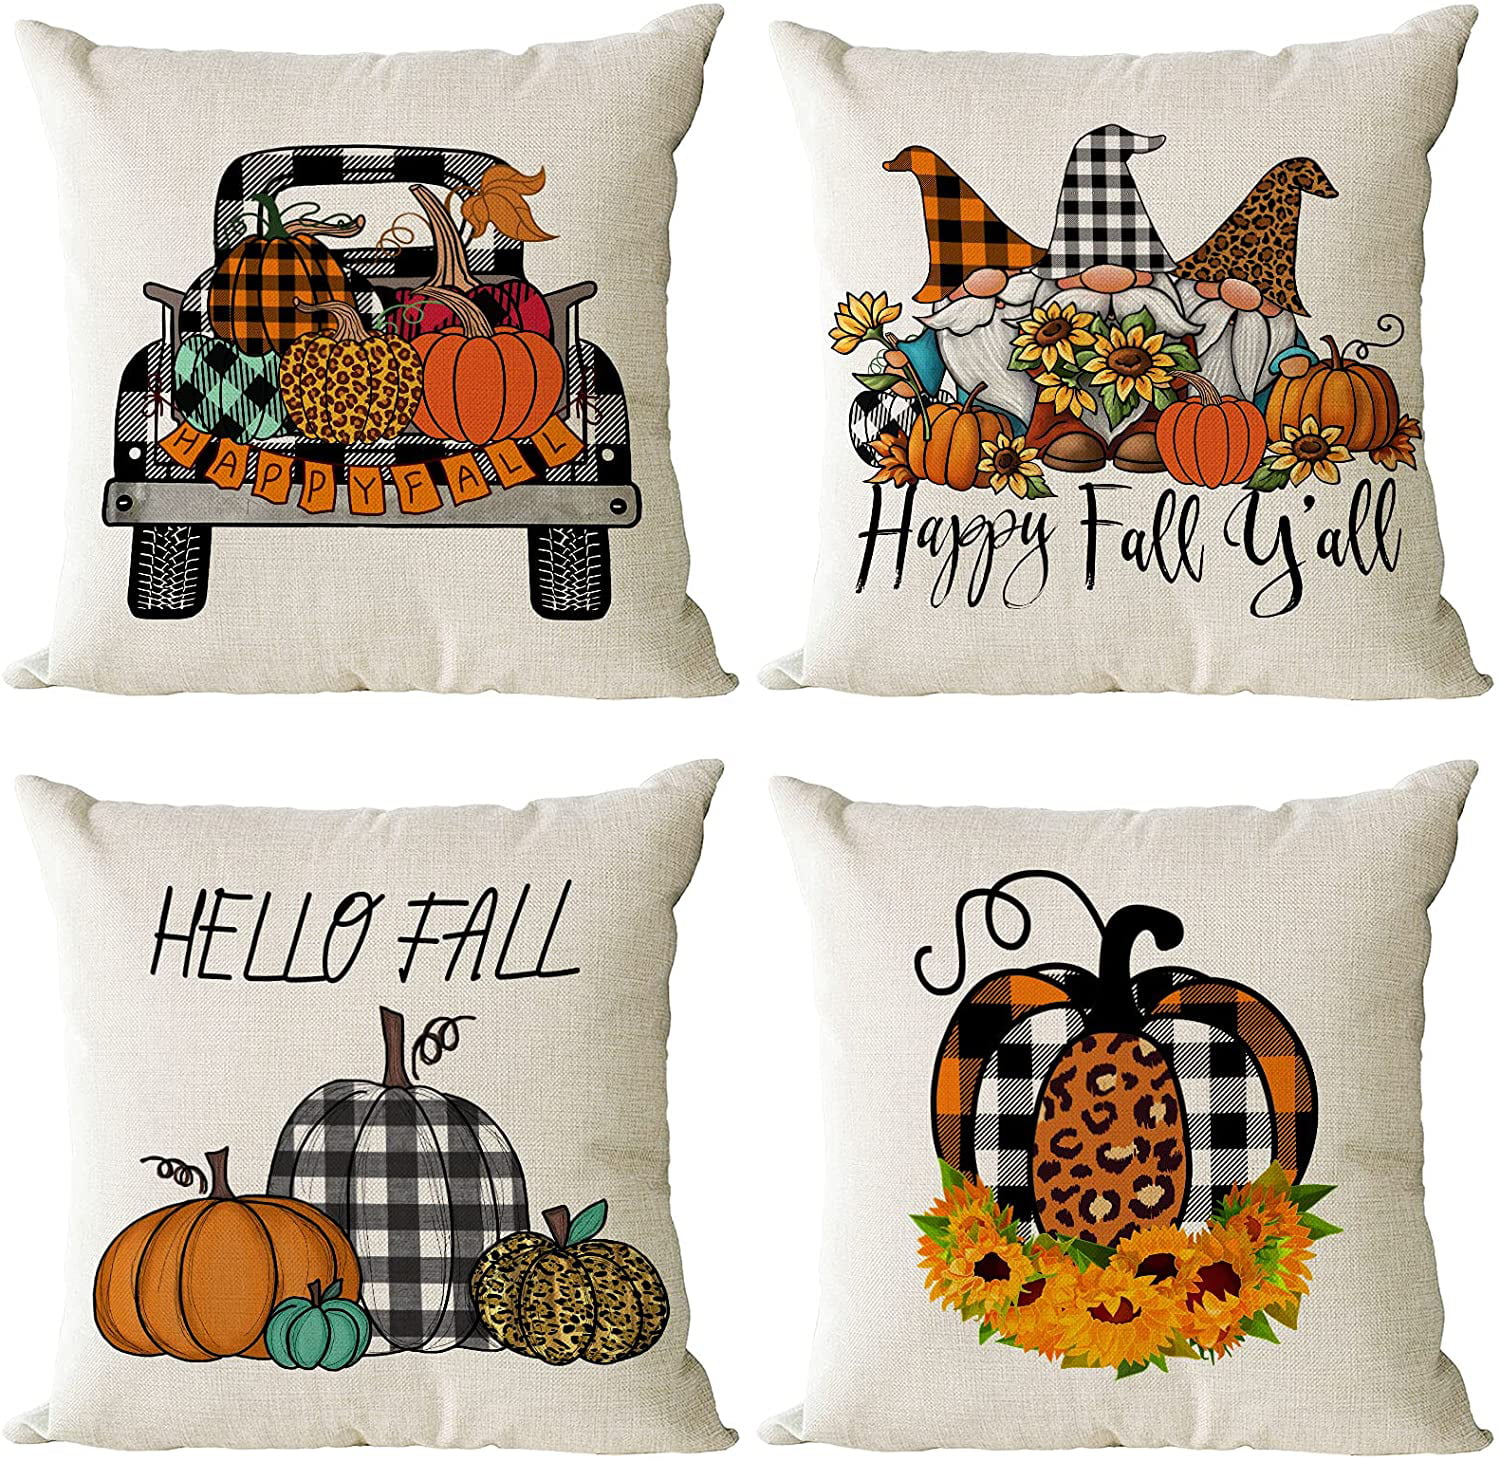 YeeJu Fall Decor Pillow Covers 18x18 Set of 4 Orange Pumpkin Maple Leaf Outdoor Fall Throw Pillows Thanksgiving Autumn Farmhouse Decorative Cushion Case for Home Couch Sofa Decorations 18 inch